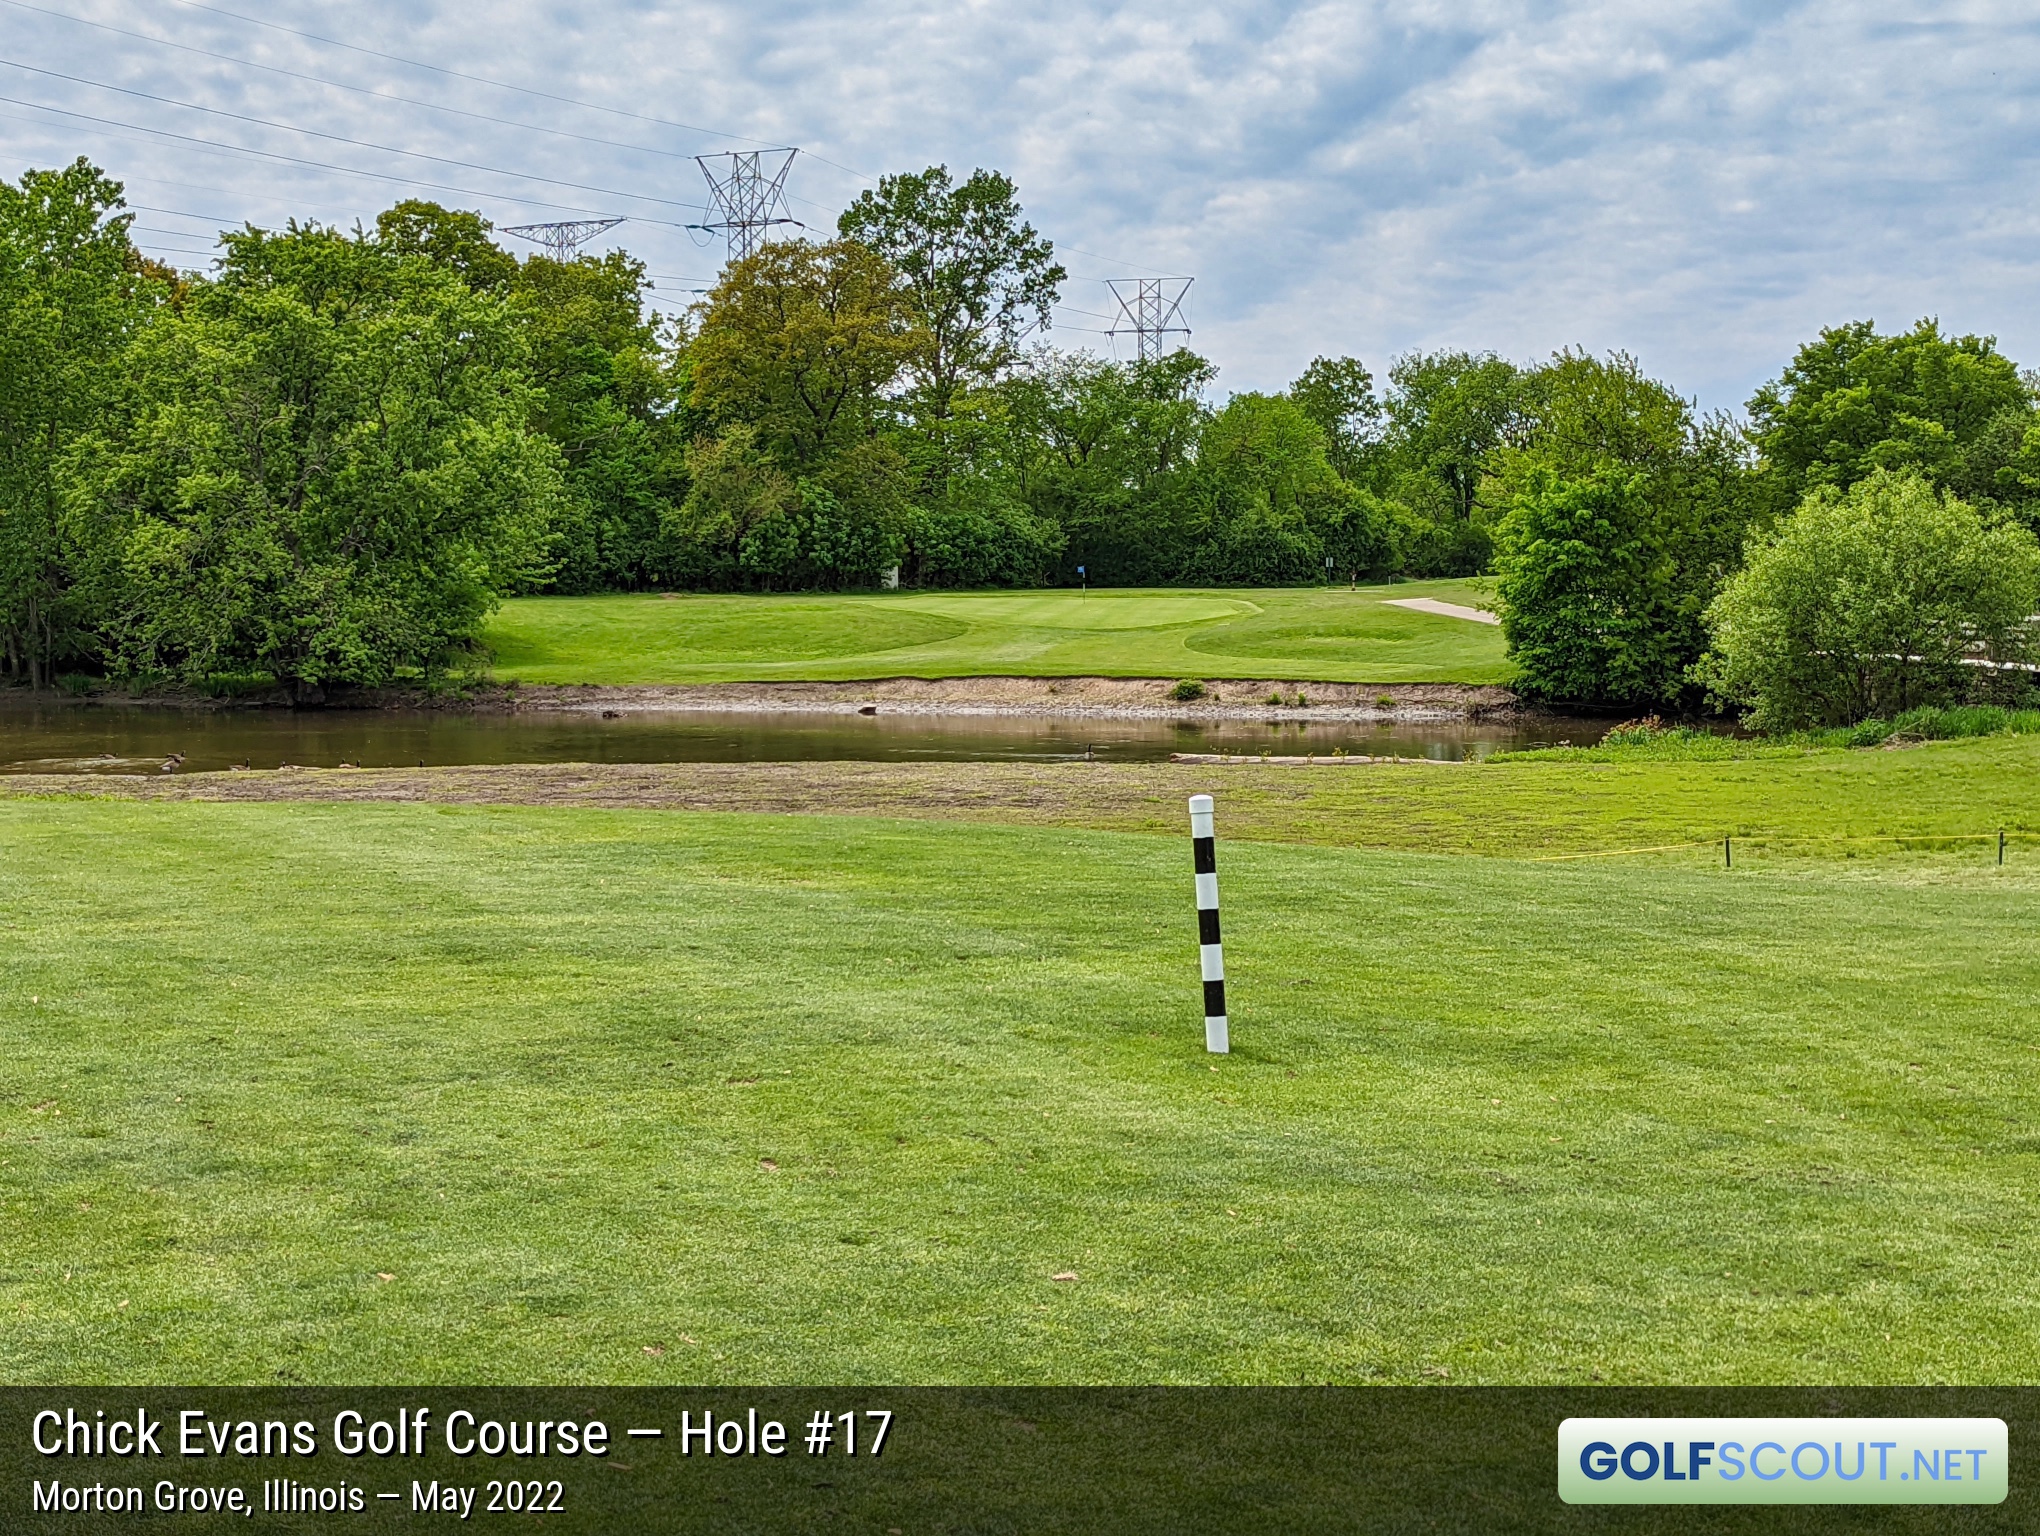 Photo of hole #17 at Chick Evans Golf Course in Morton Grove, Illinois. 